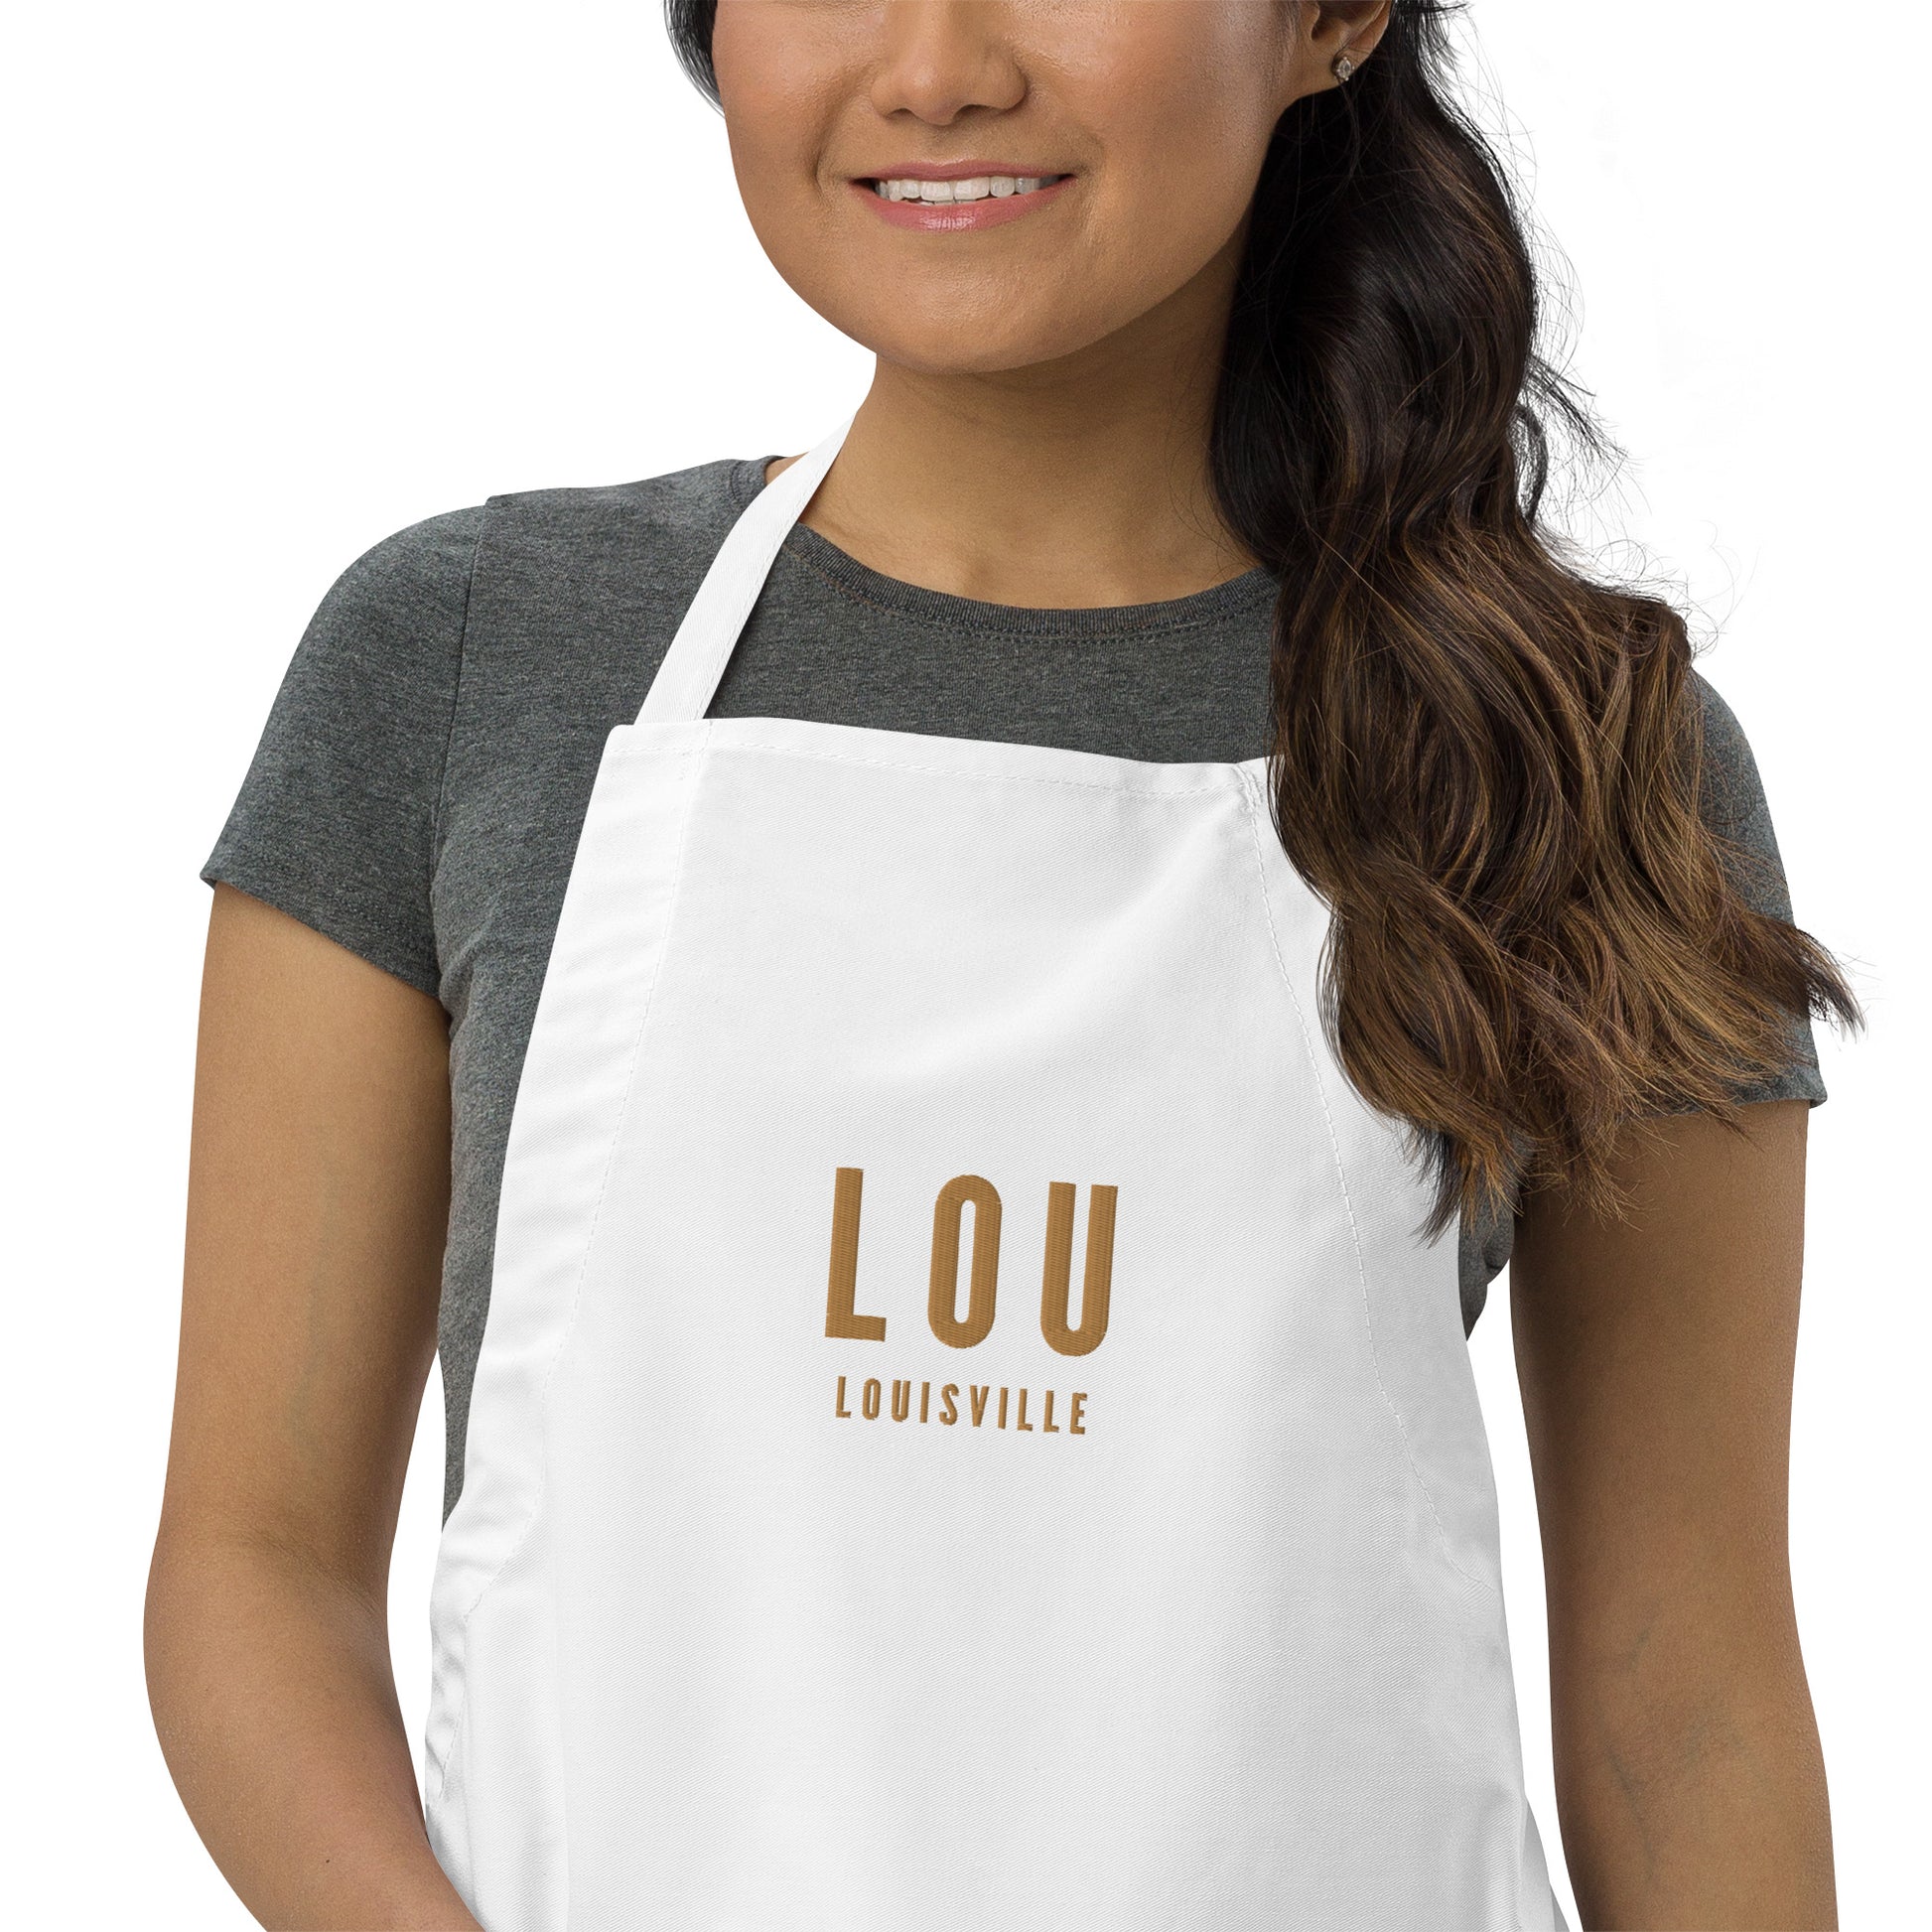 City Embroidered Apron - Old Gold • LOU Louisville • YHM Designs - Image 08